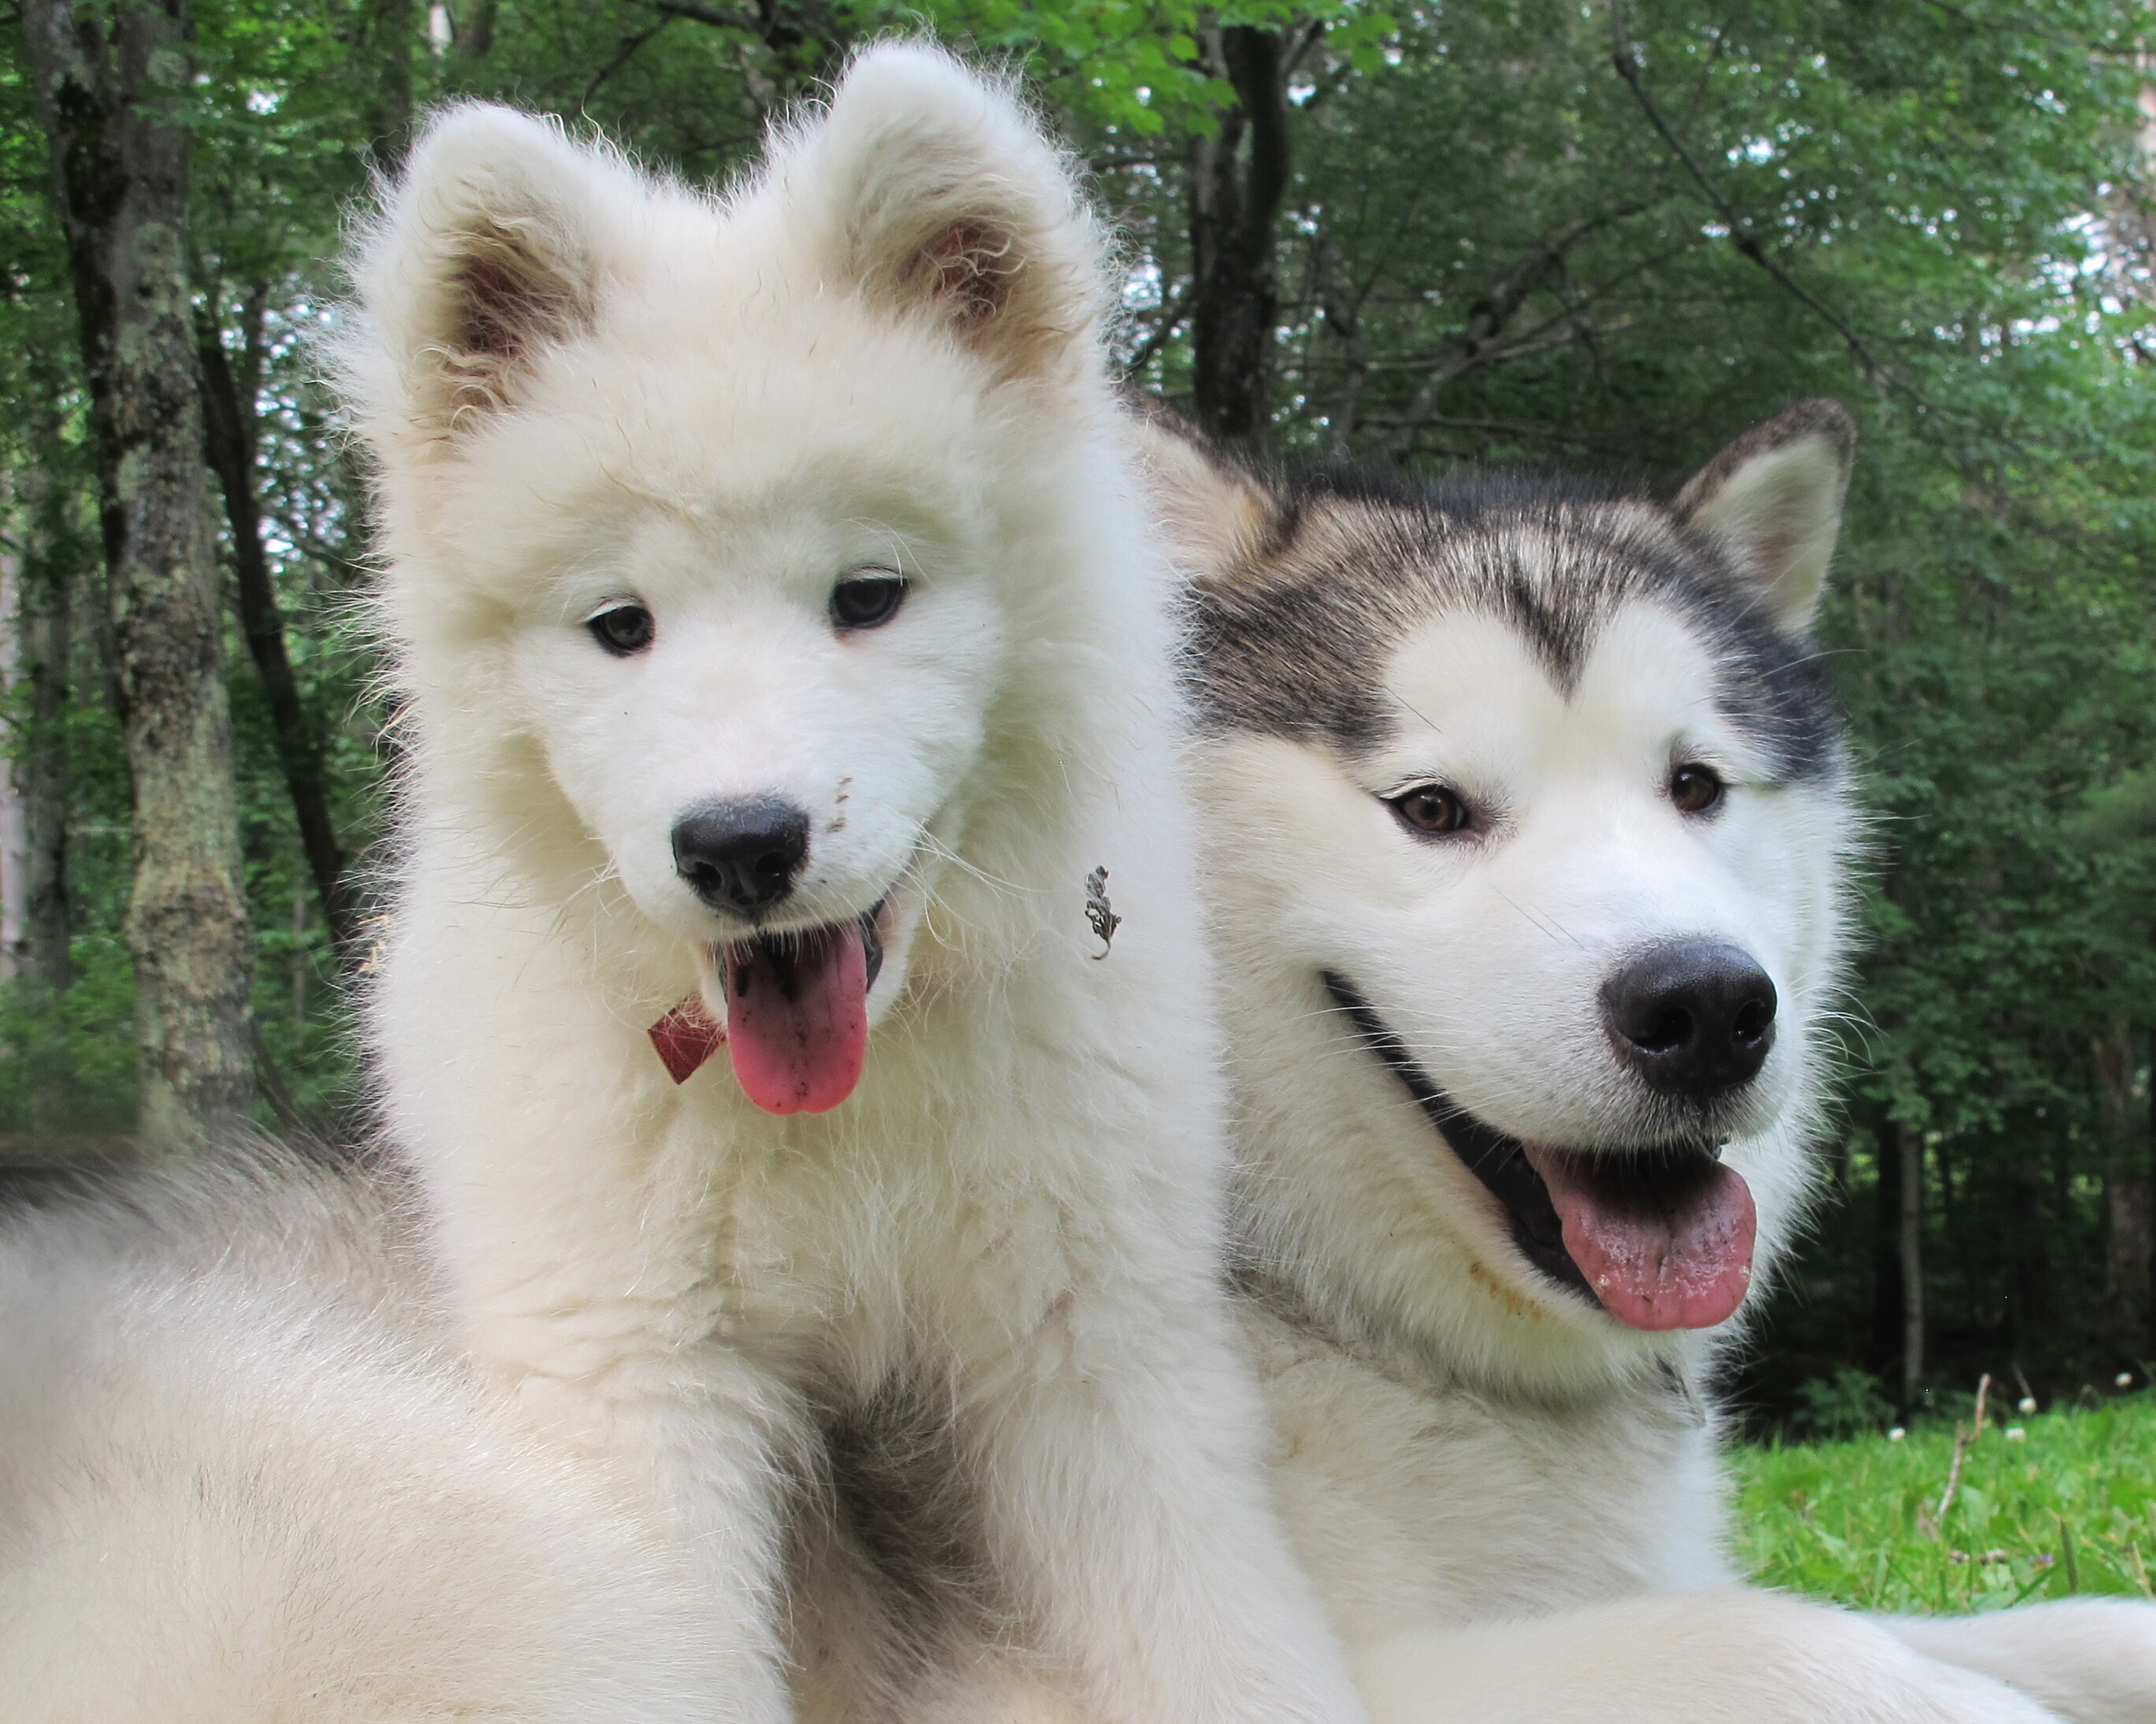 Two huskies sitting together